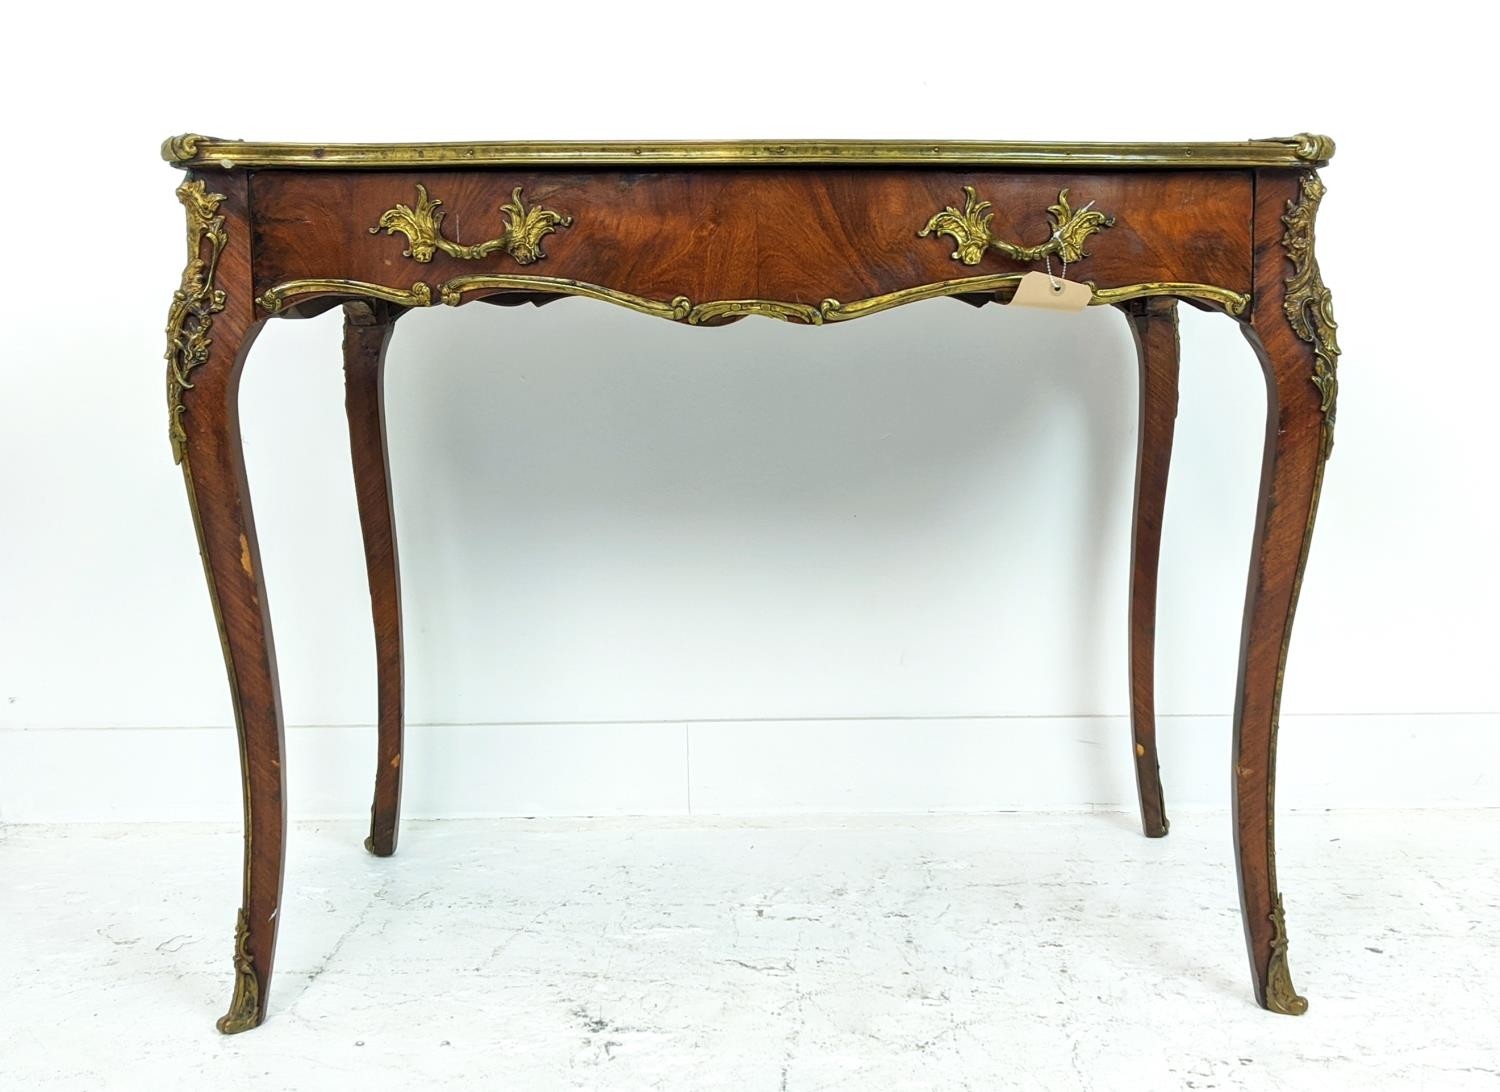 BUREAU PLAT, circa 1880, Louis XV style, French parquetry with ormolu mounts single long drawer - Image 5 of 22